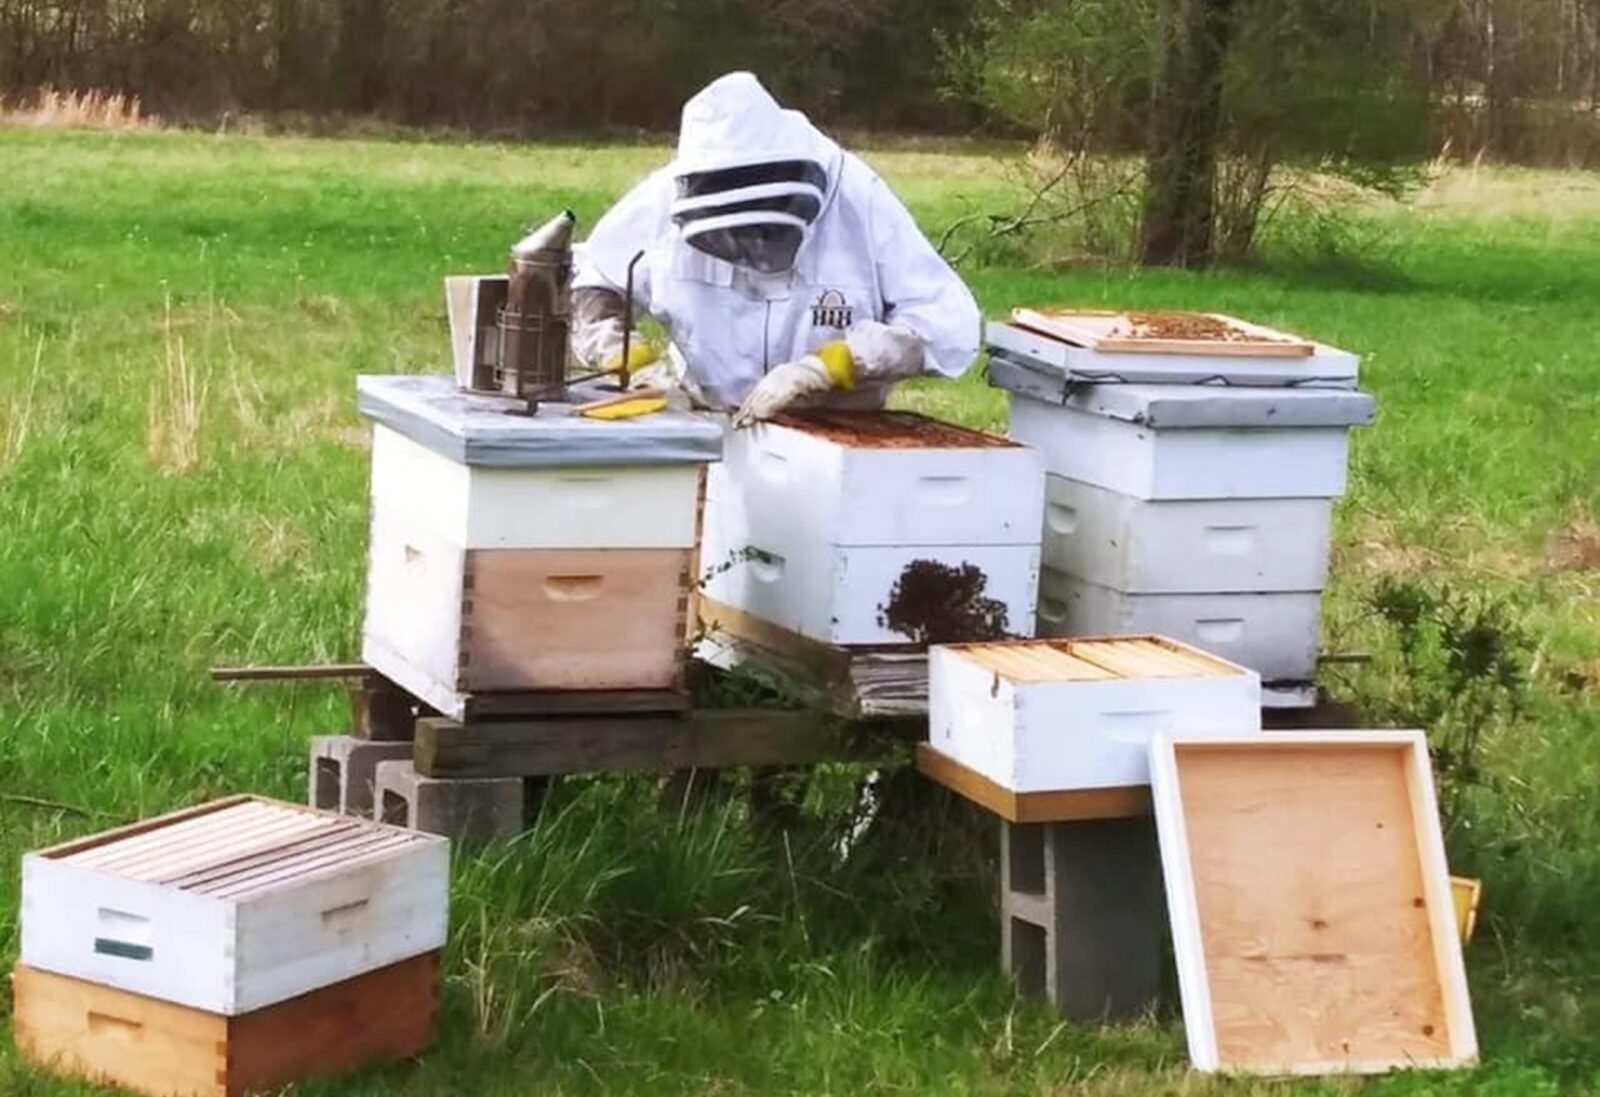 Mississippi Bee specialist shares tips on beekeeping